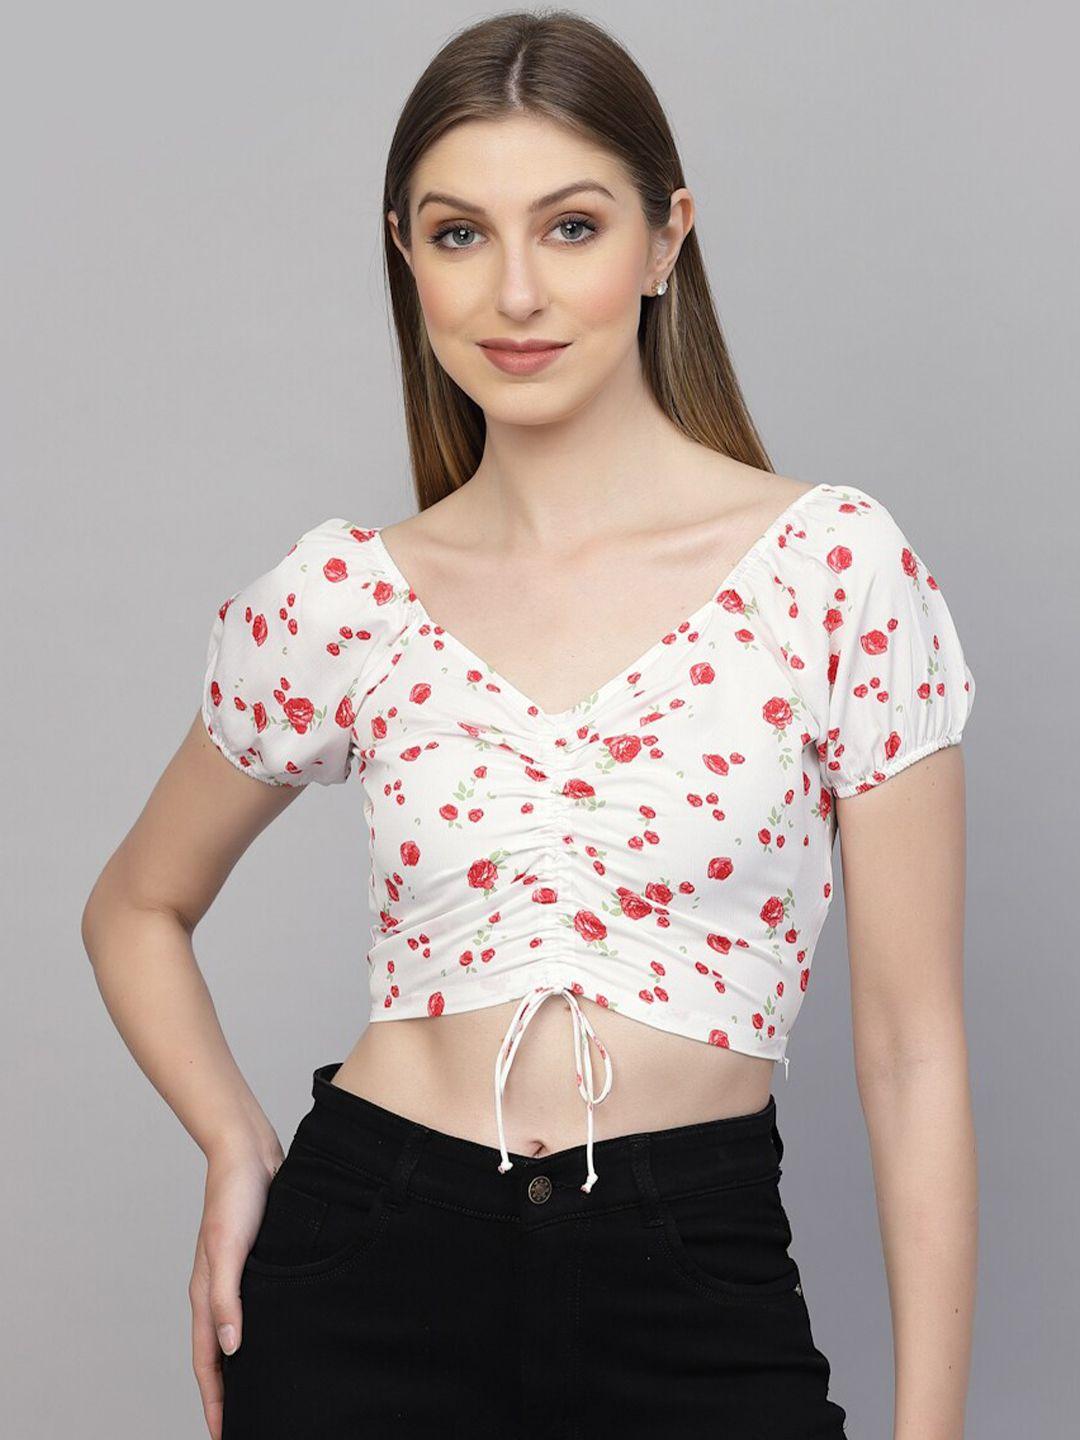 aayu floral printed puff sleeves v-neck ruched fitted crop top